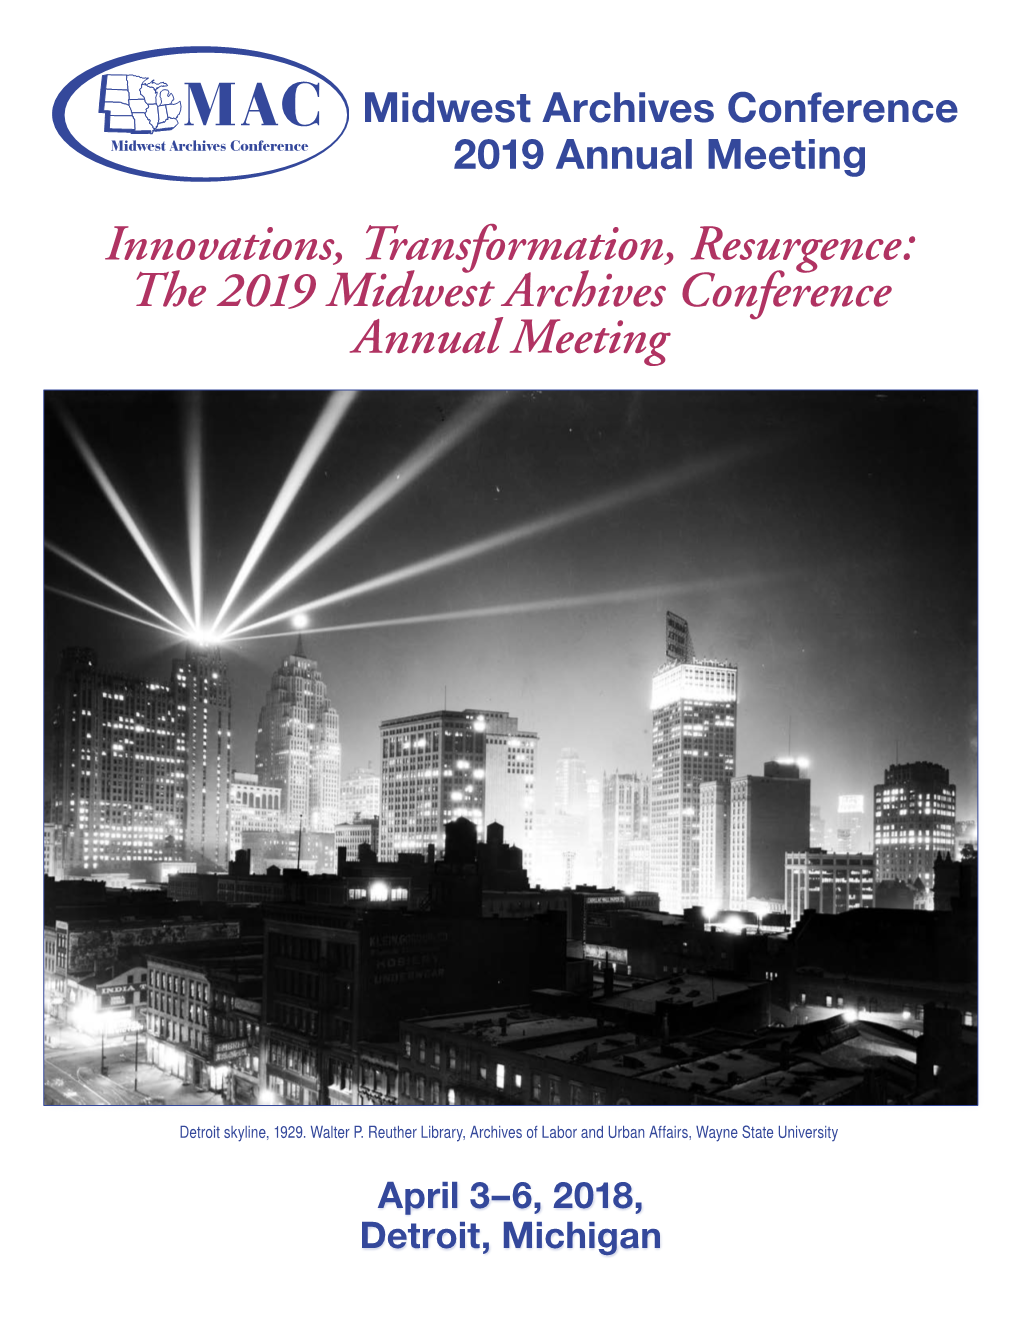 The 2019 Midwest Archives Conference Annual Meeting